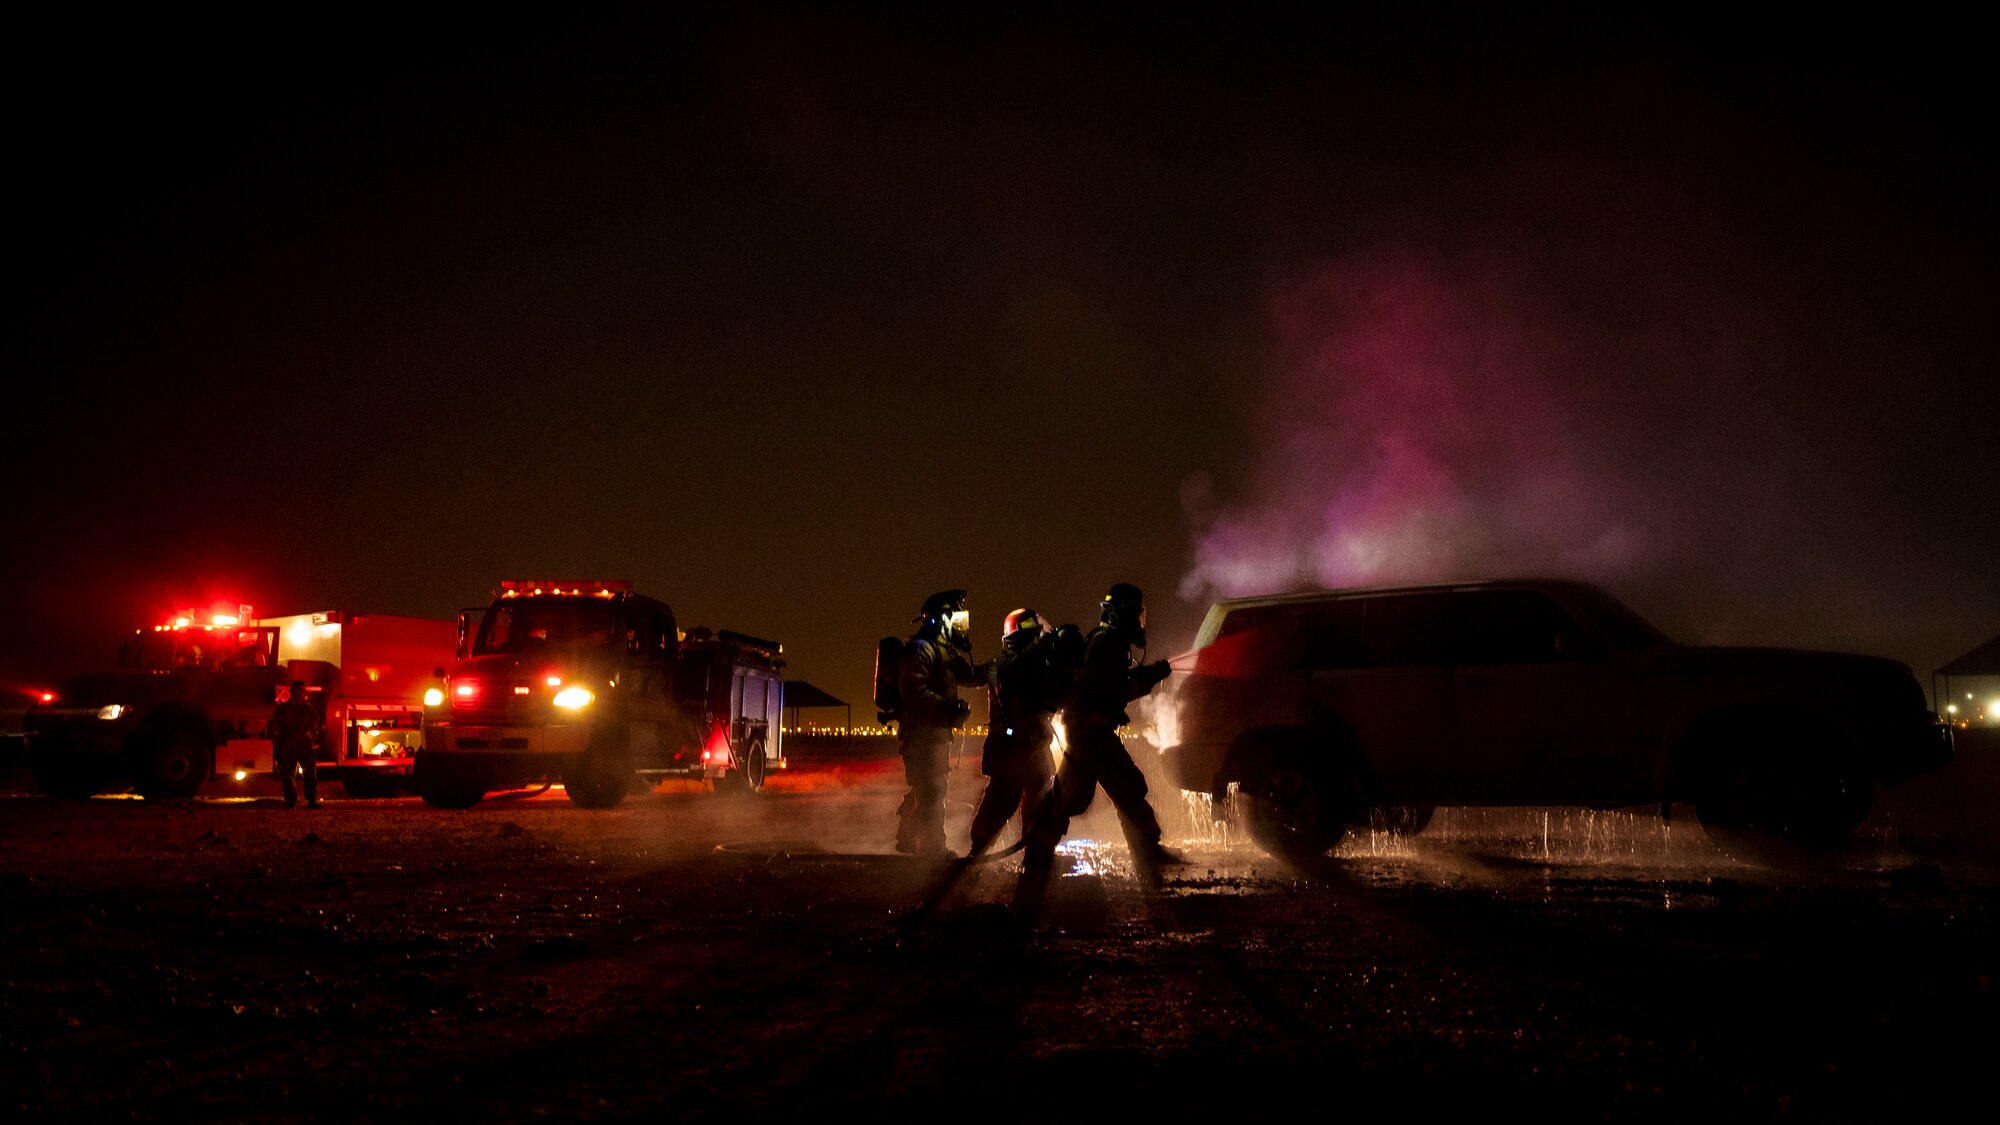 379th Expeditionary Civil Engineer Squadron firefighters extinguish a car fire during a training exercise August 10, 2021, at Al Udeid Air Base, Qatar.